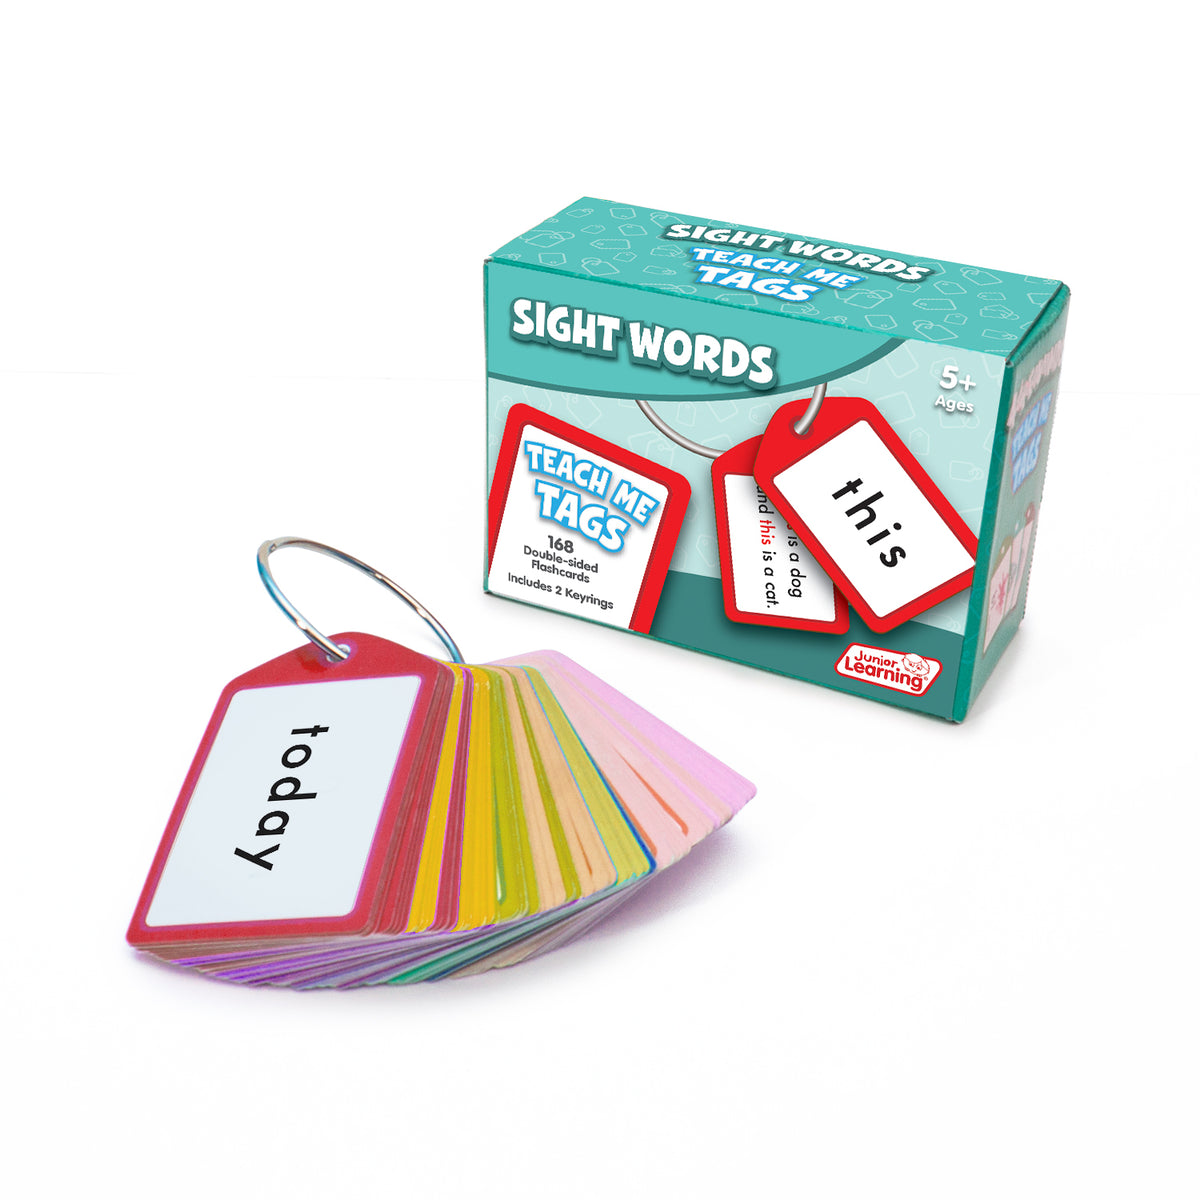 Junior Learning JL629 Sight Words Teach Me Tags box and content